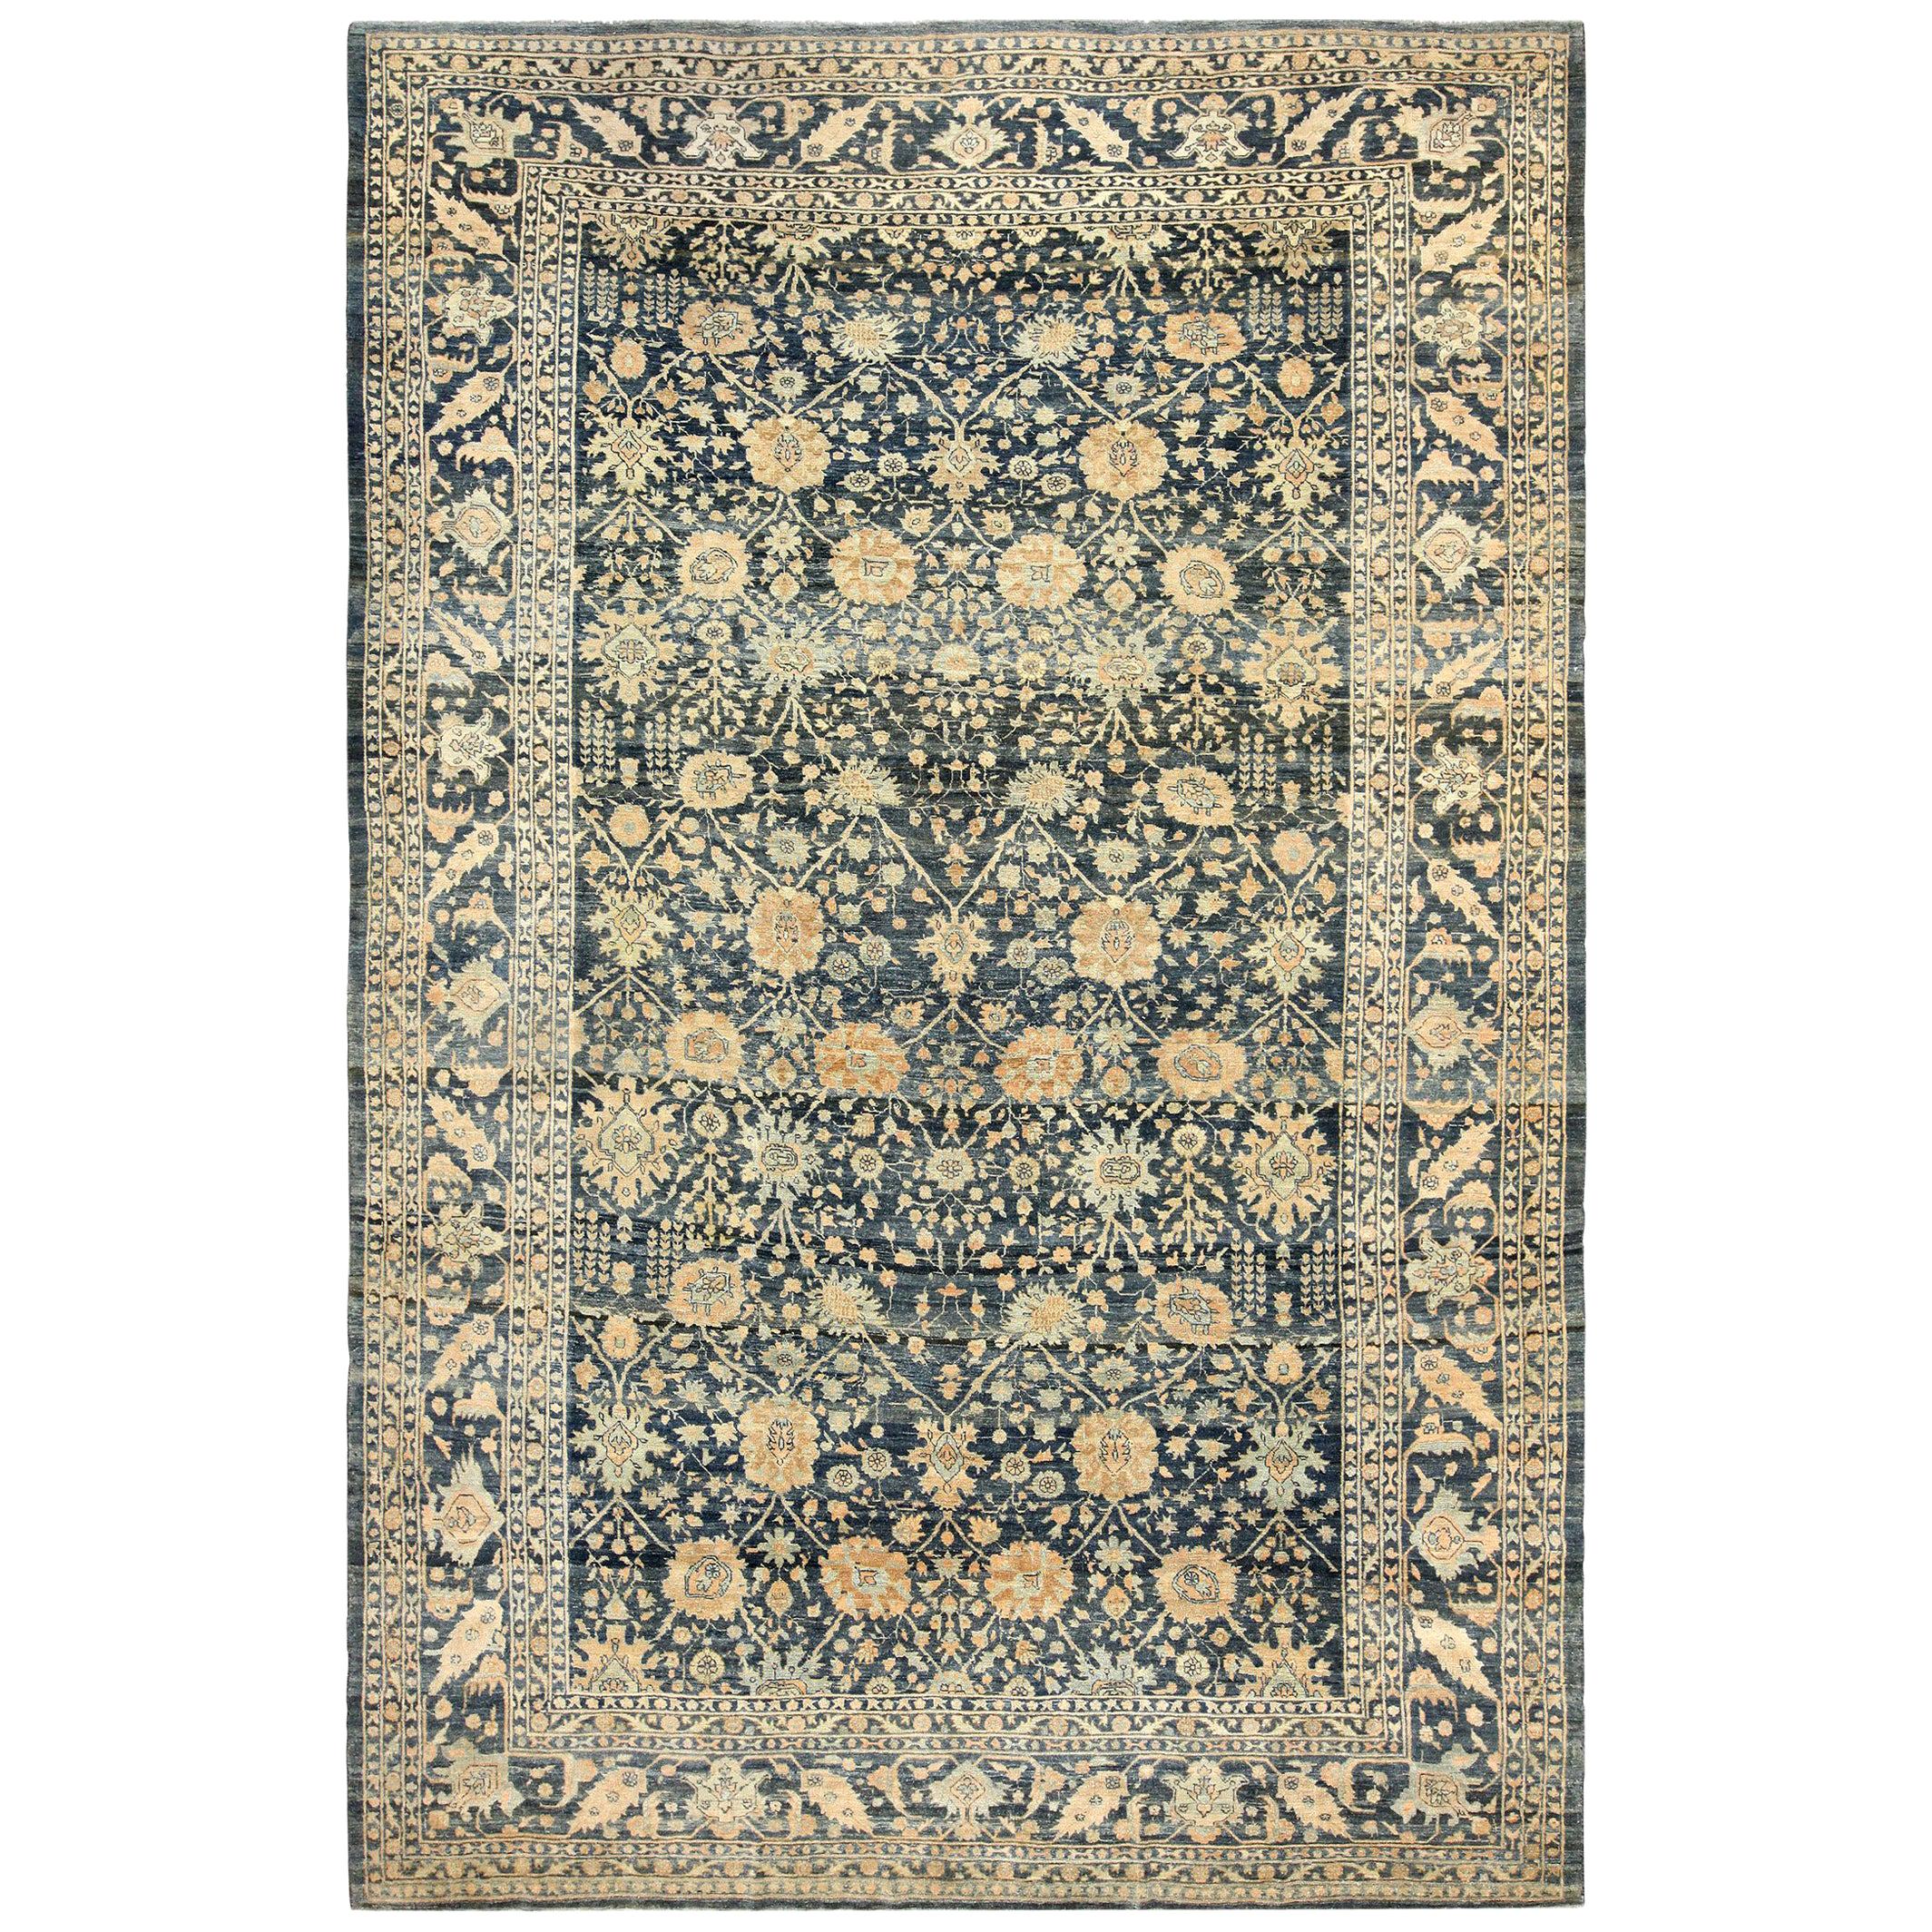 Nazmiyal Collection Antique Tabriz Persian Rug. Size: 10 ft x 14 ft 8 in 